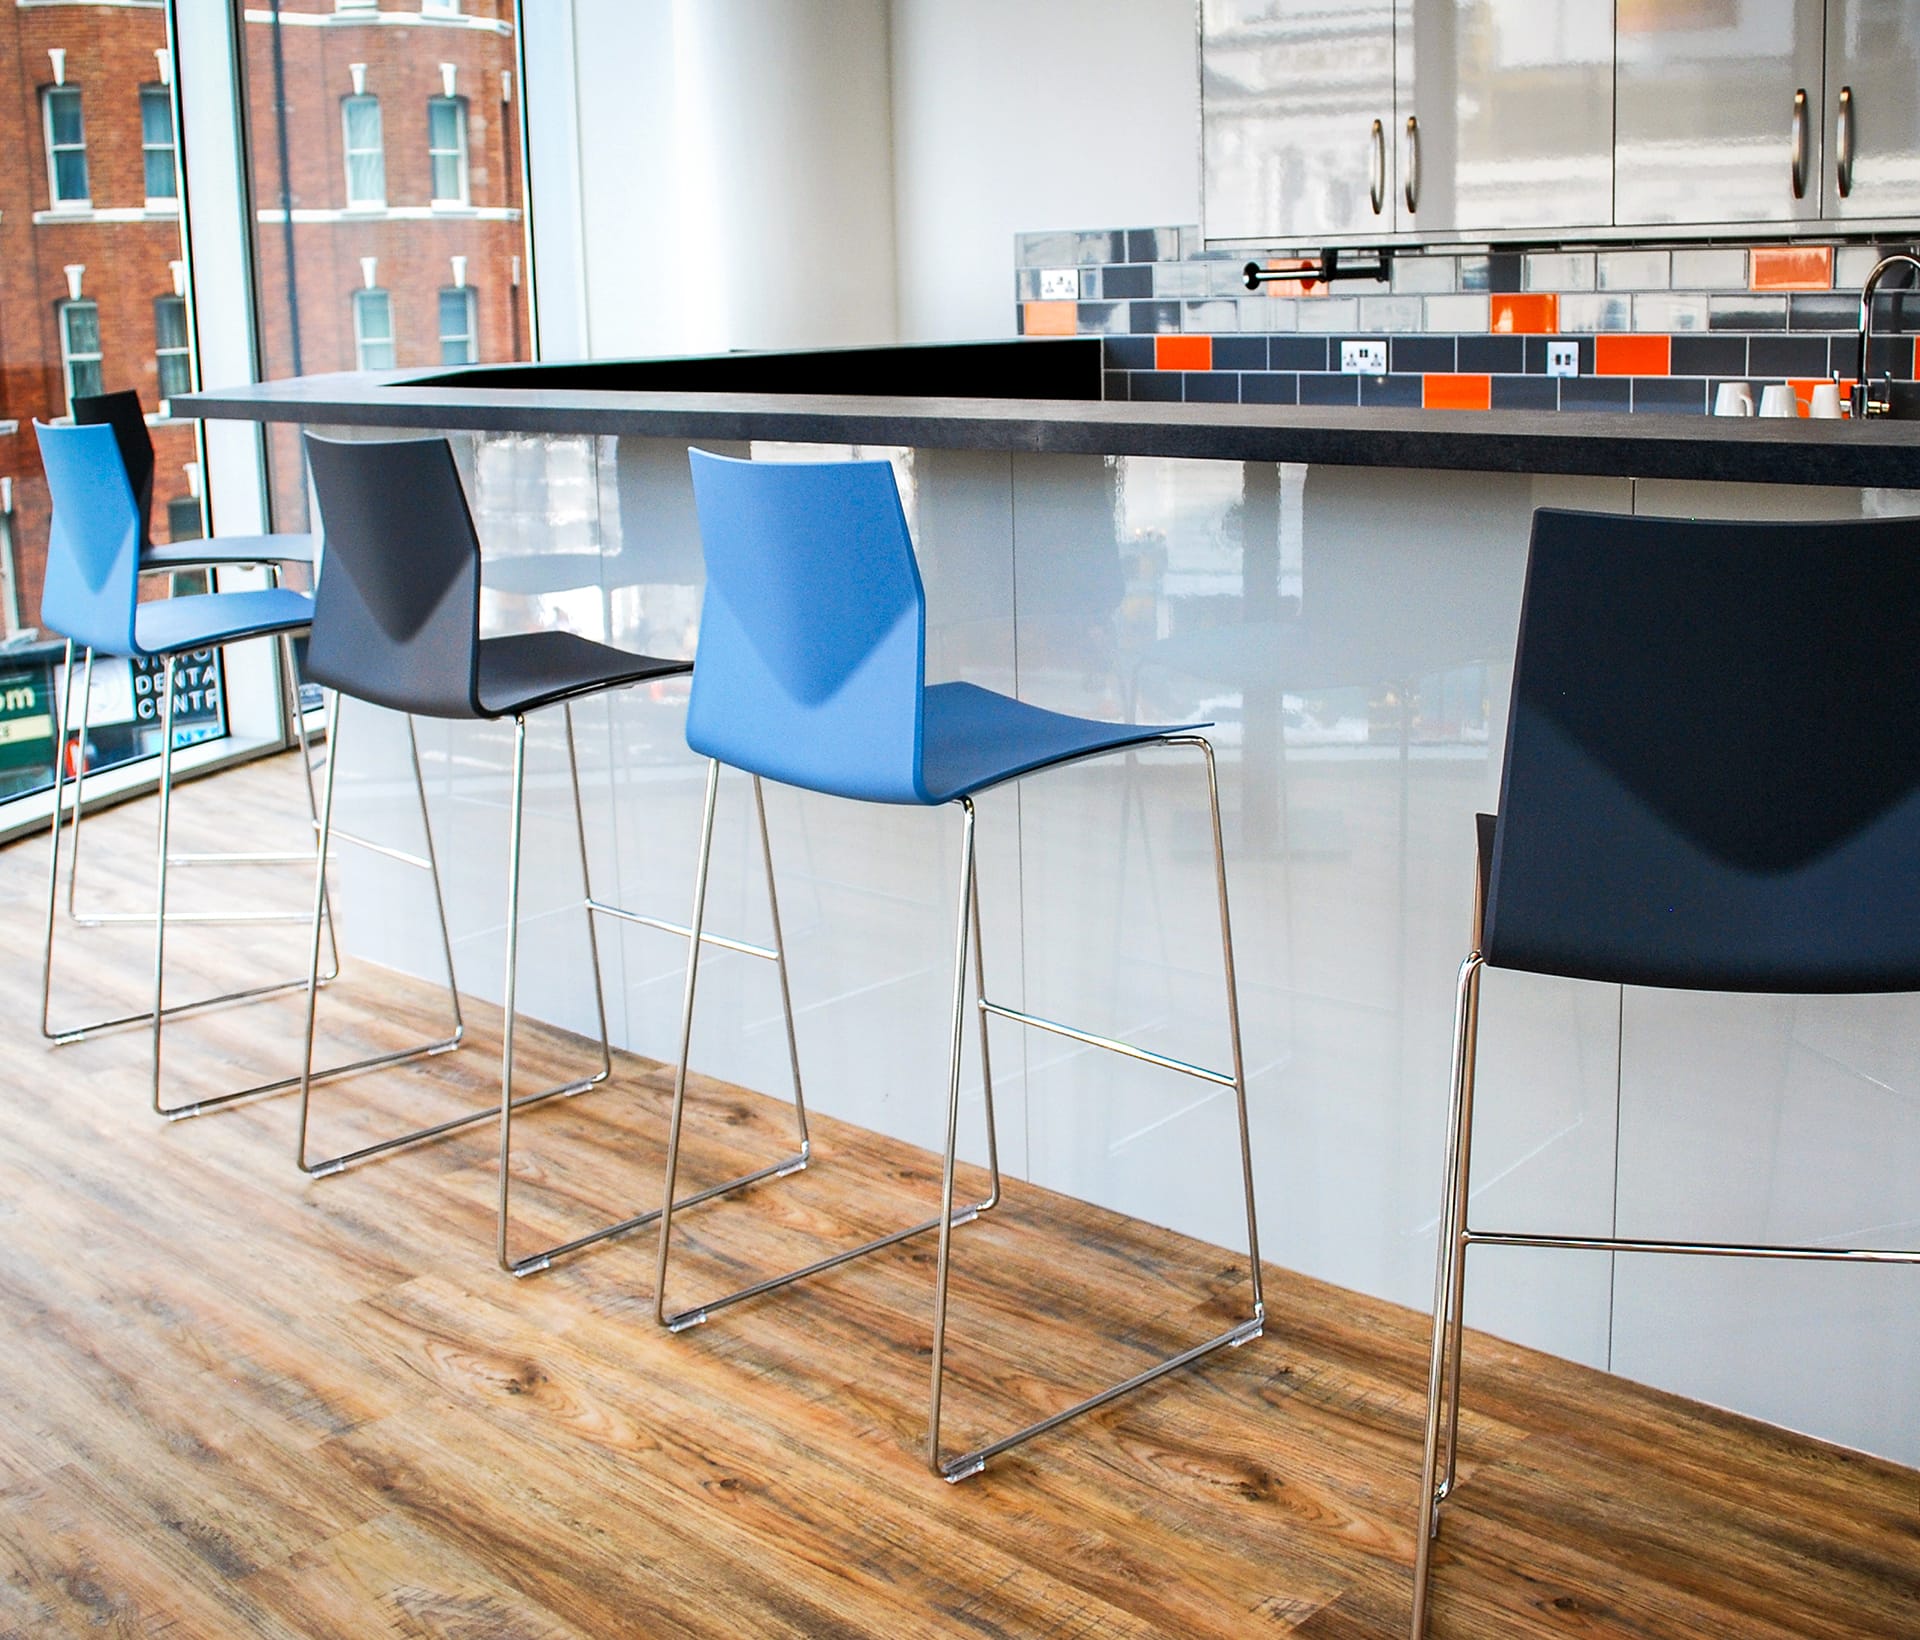 A row of counter chairs in a kitchen.